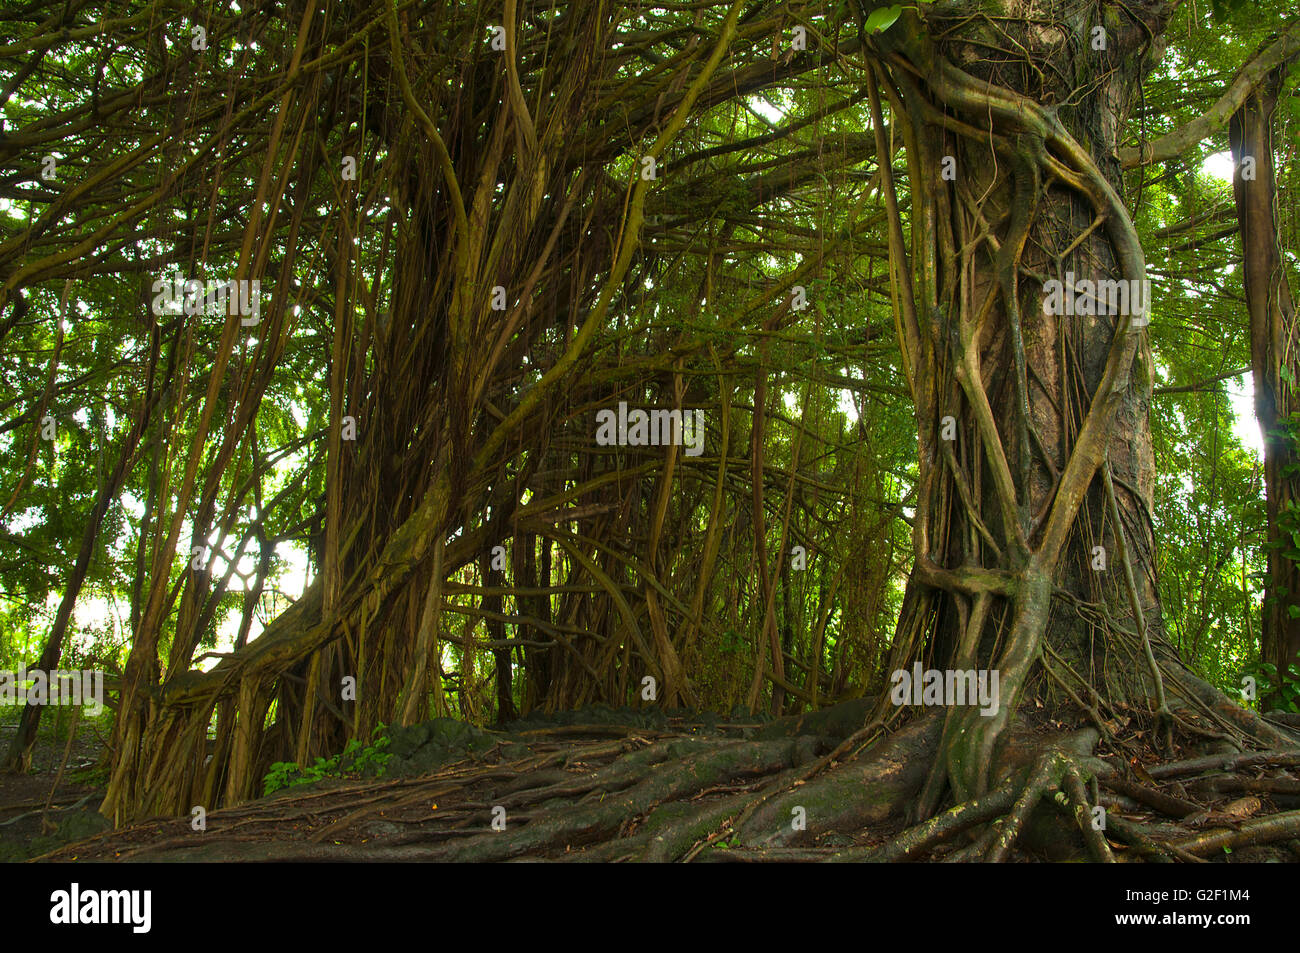 Banyan tree forest at Big Island, Hawaii. Giant exotic trees forest located near Hilo, Hawaii Stock Photo